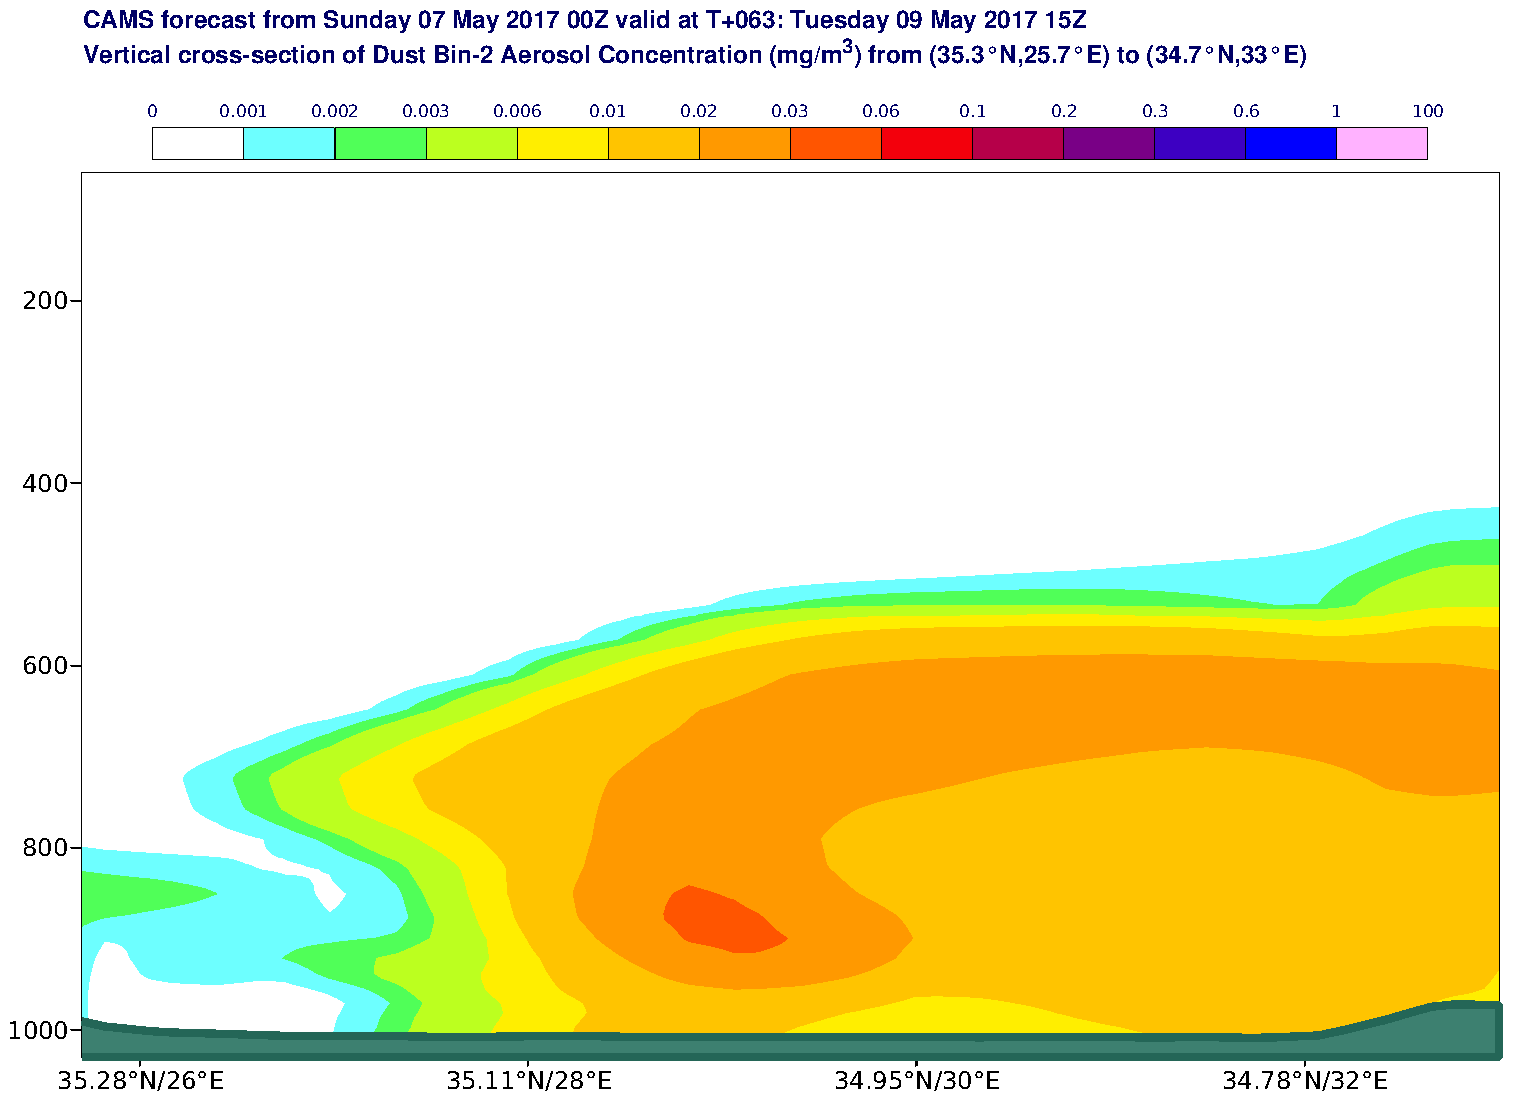 Vertical cross-section of Dust Bin-2 Aerosol Concentration (mg/m3) valid at T63 - 2017-05-09 15:00